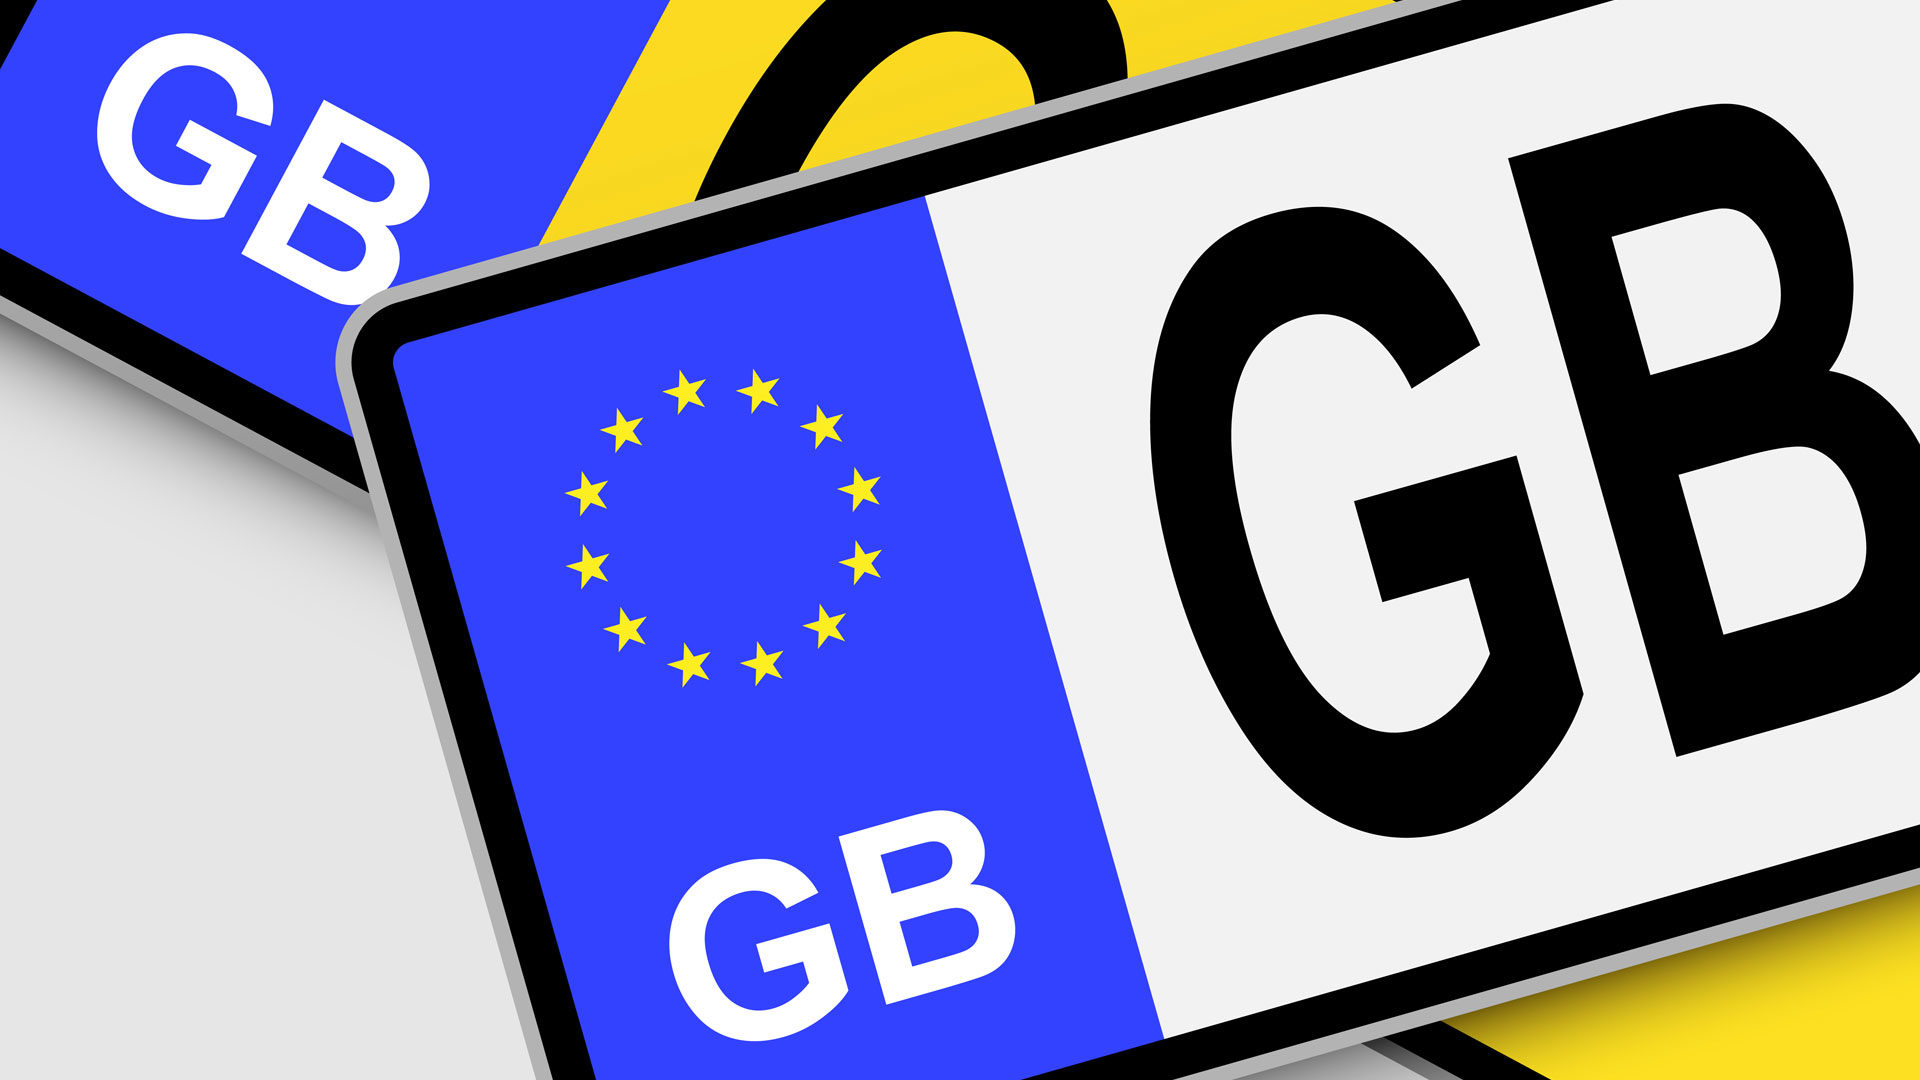 UK Motorbike Number Plate NO EU Flag Brexit Pack of 2 Vinyl Stickers Union Jack Replaces GB Sticker